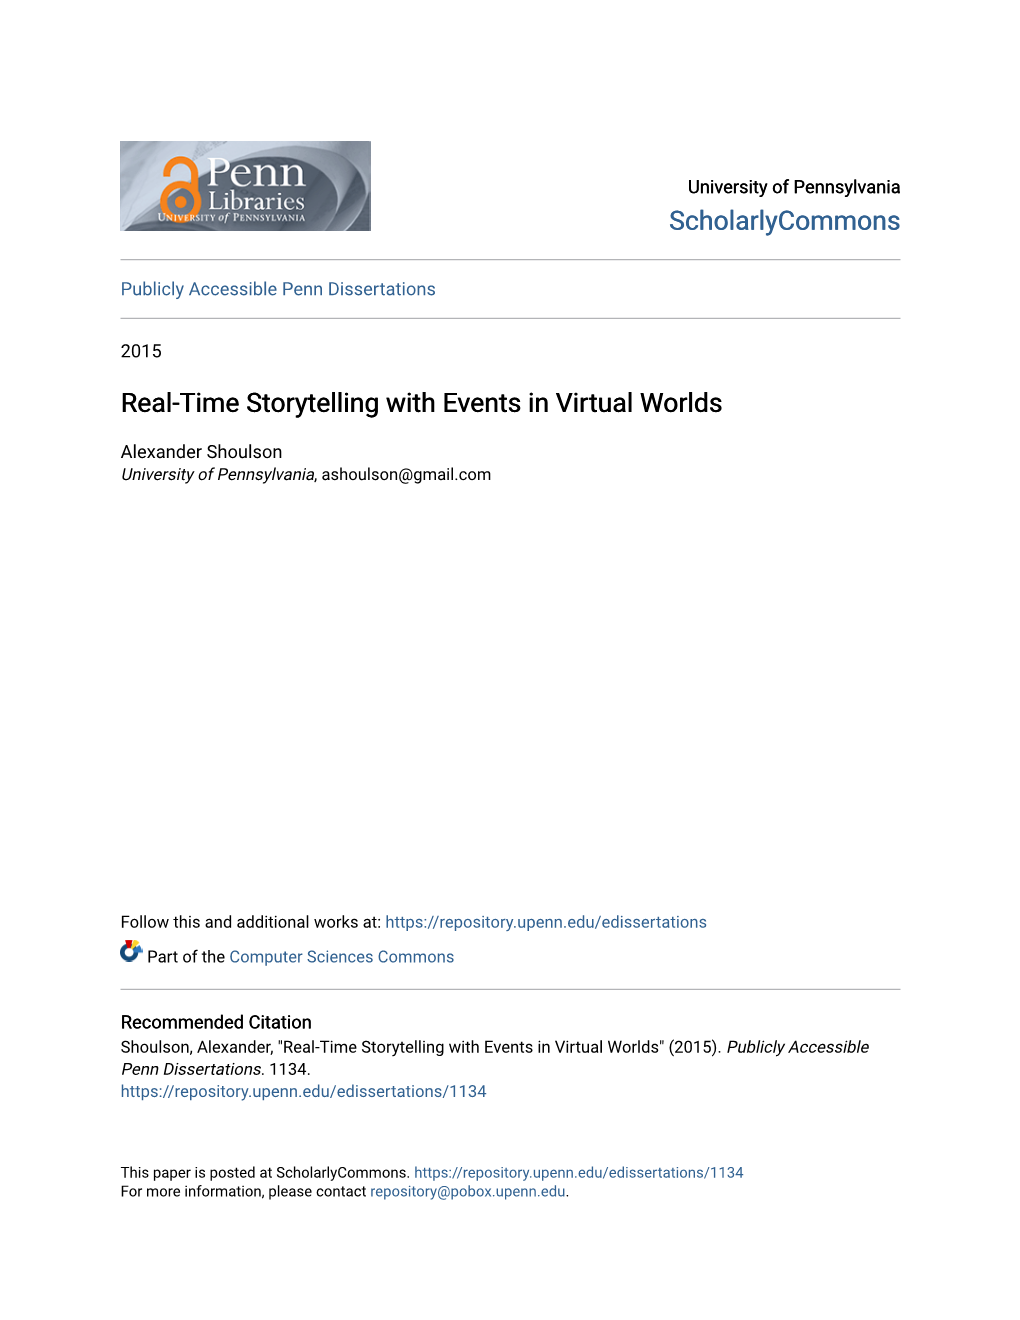 Real-Time Storytelling with Events in Virtual Worlds